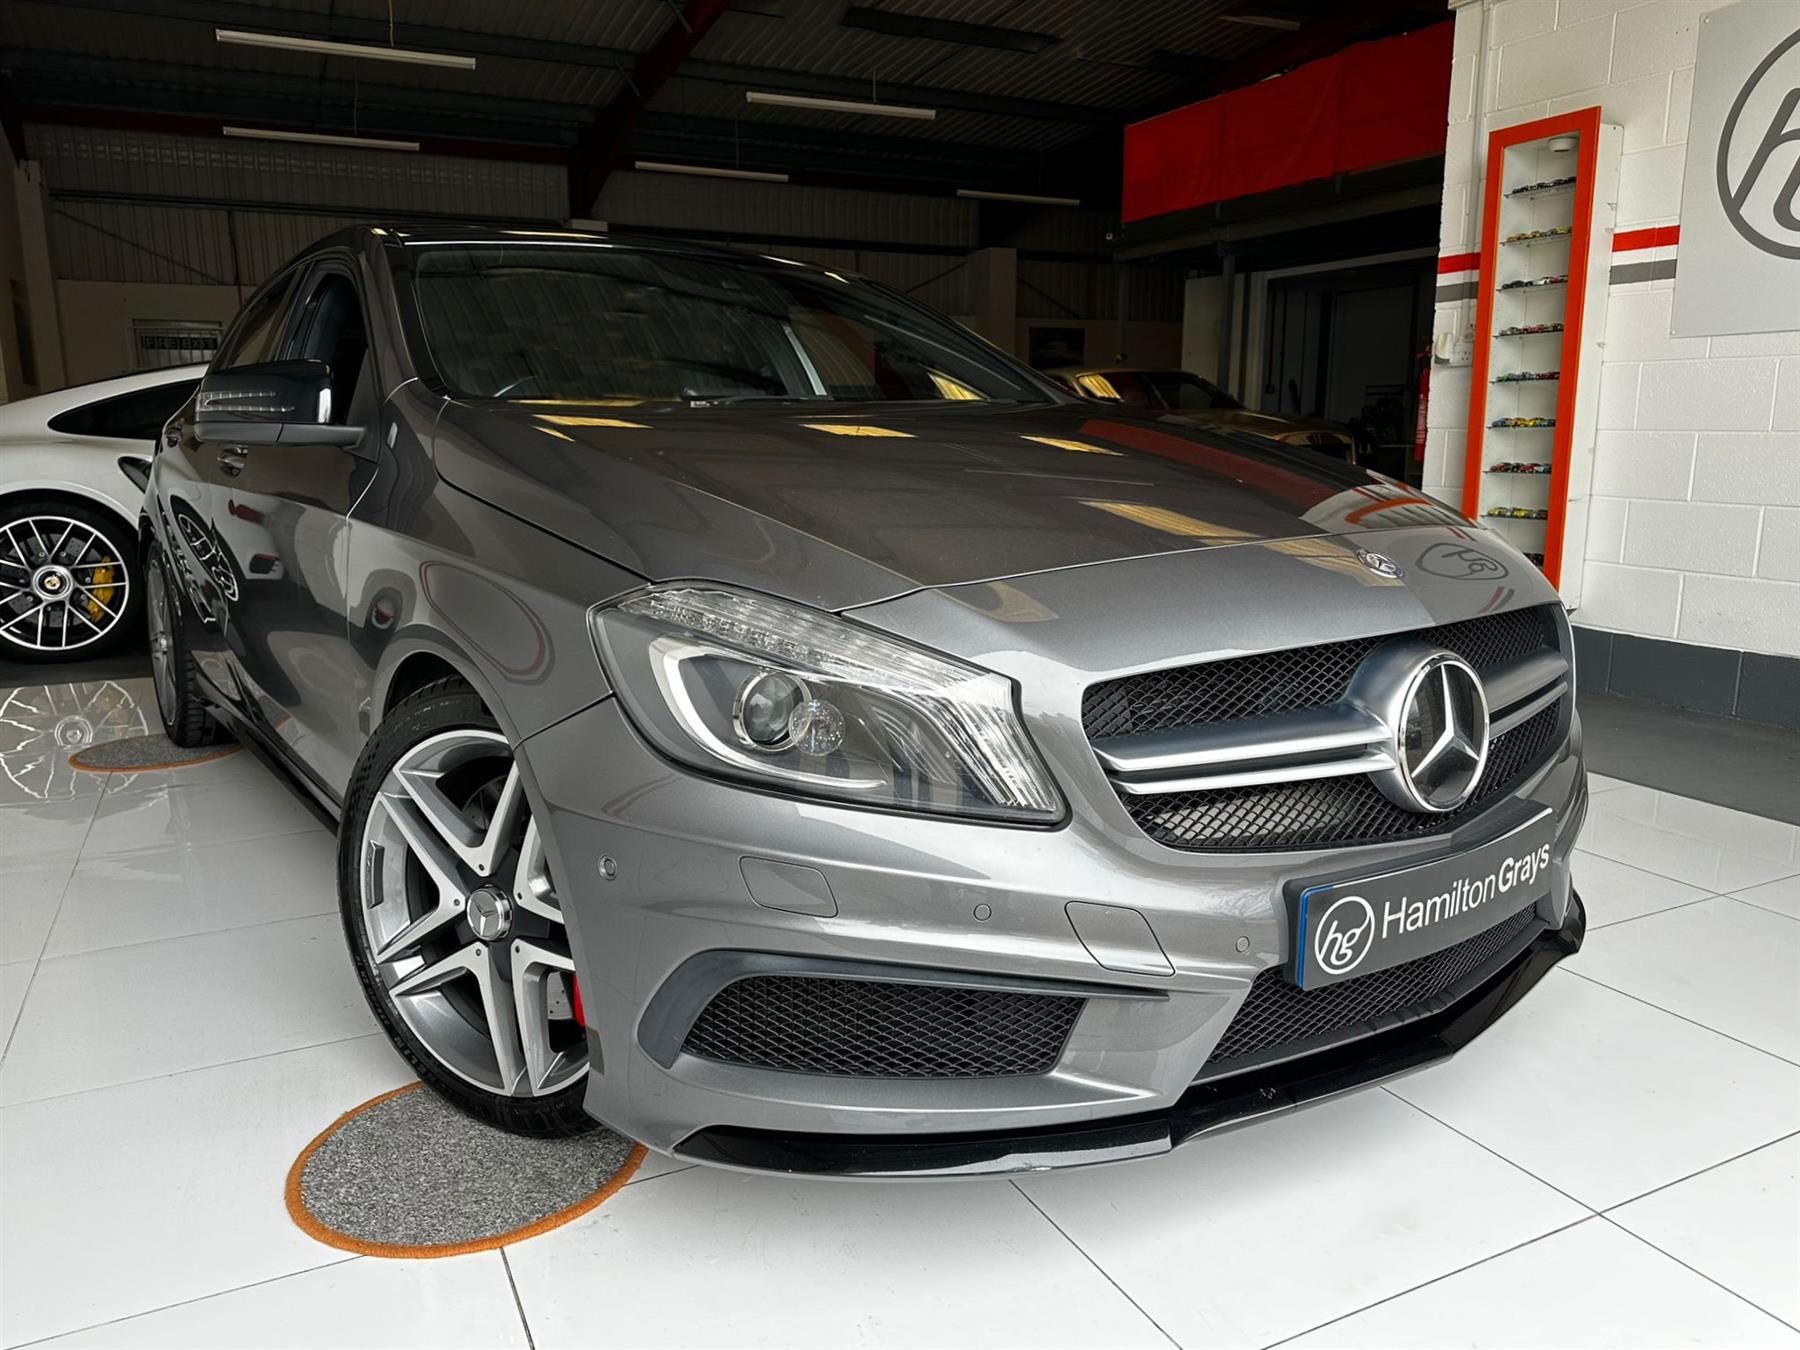 2014 (14) Mercedes-Benz A Class 2.0 A45 AMG SpdS DCT 4MATIC. In Mountain Grey Metallic / Black Artico Leather and Red Stitching.